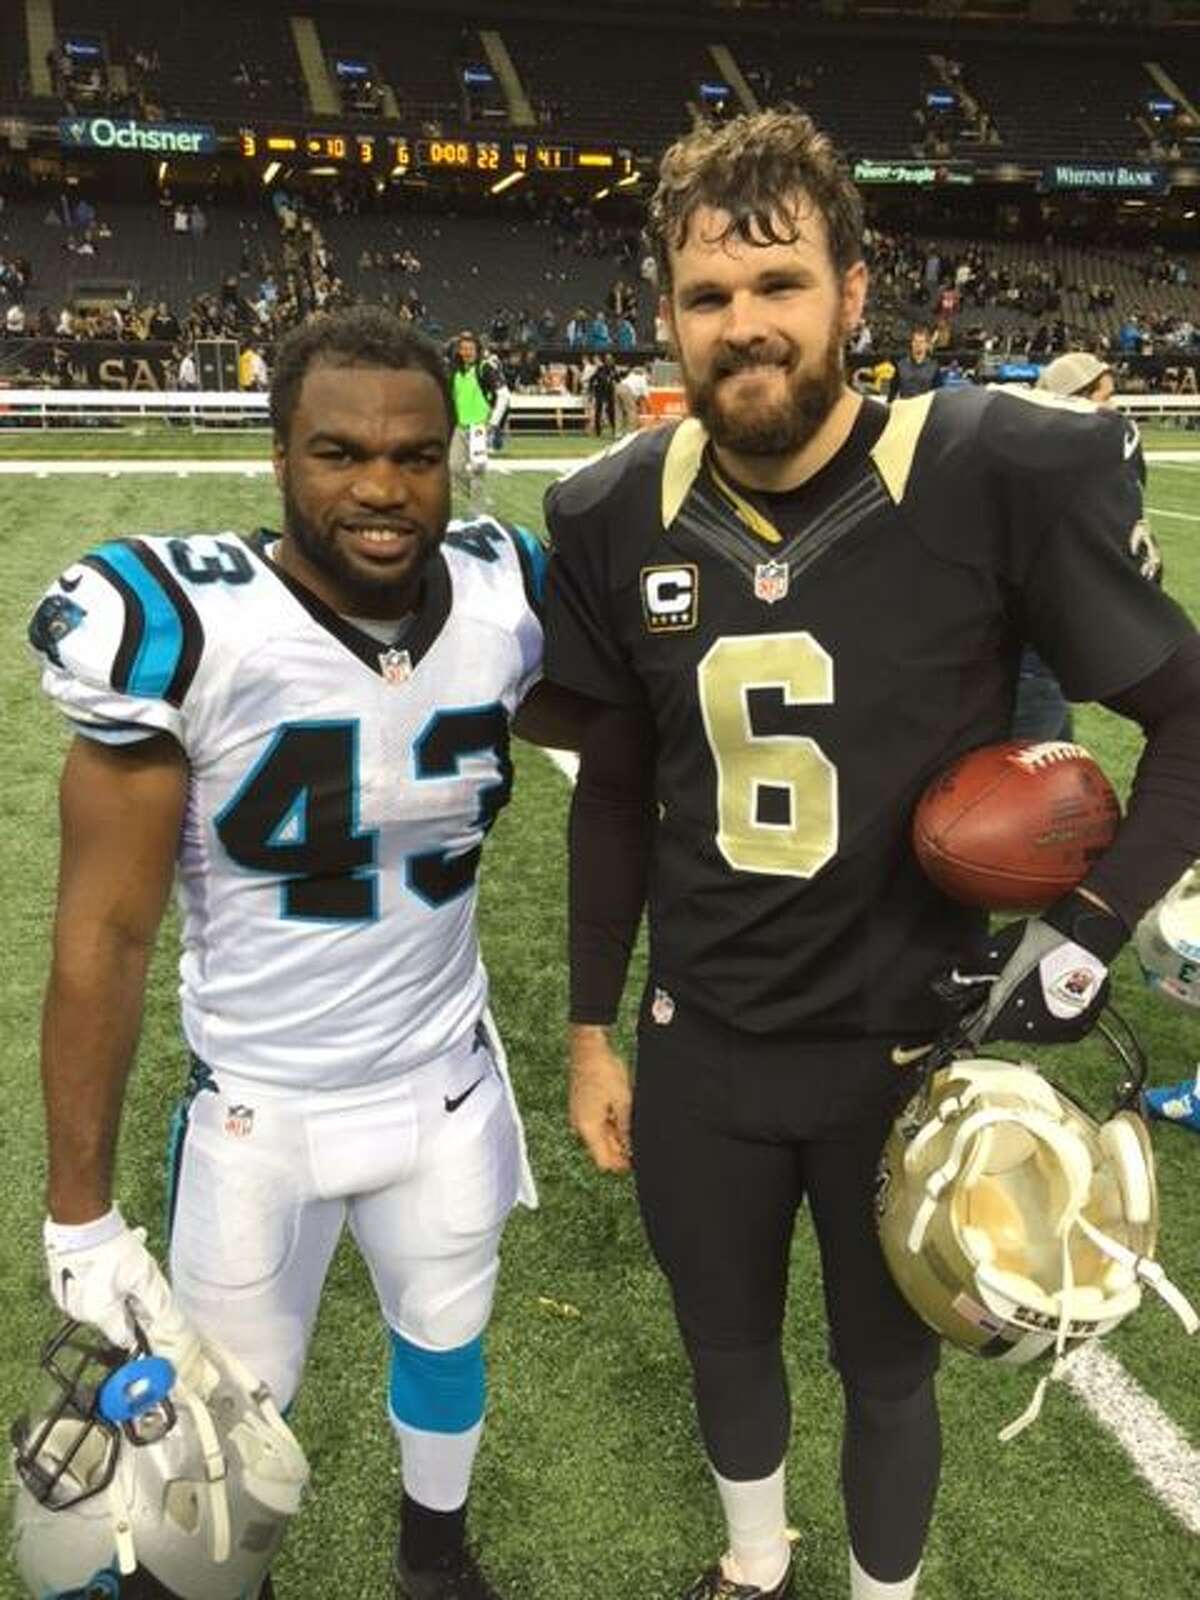 A couple of former Pearland Oilers are shared the NFL limelight when Fozzy Whittaker (left) and Thomas Morstead met in a game between the Carolina Panthers and New Orleans Saints in 2017.